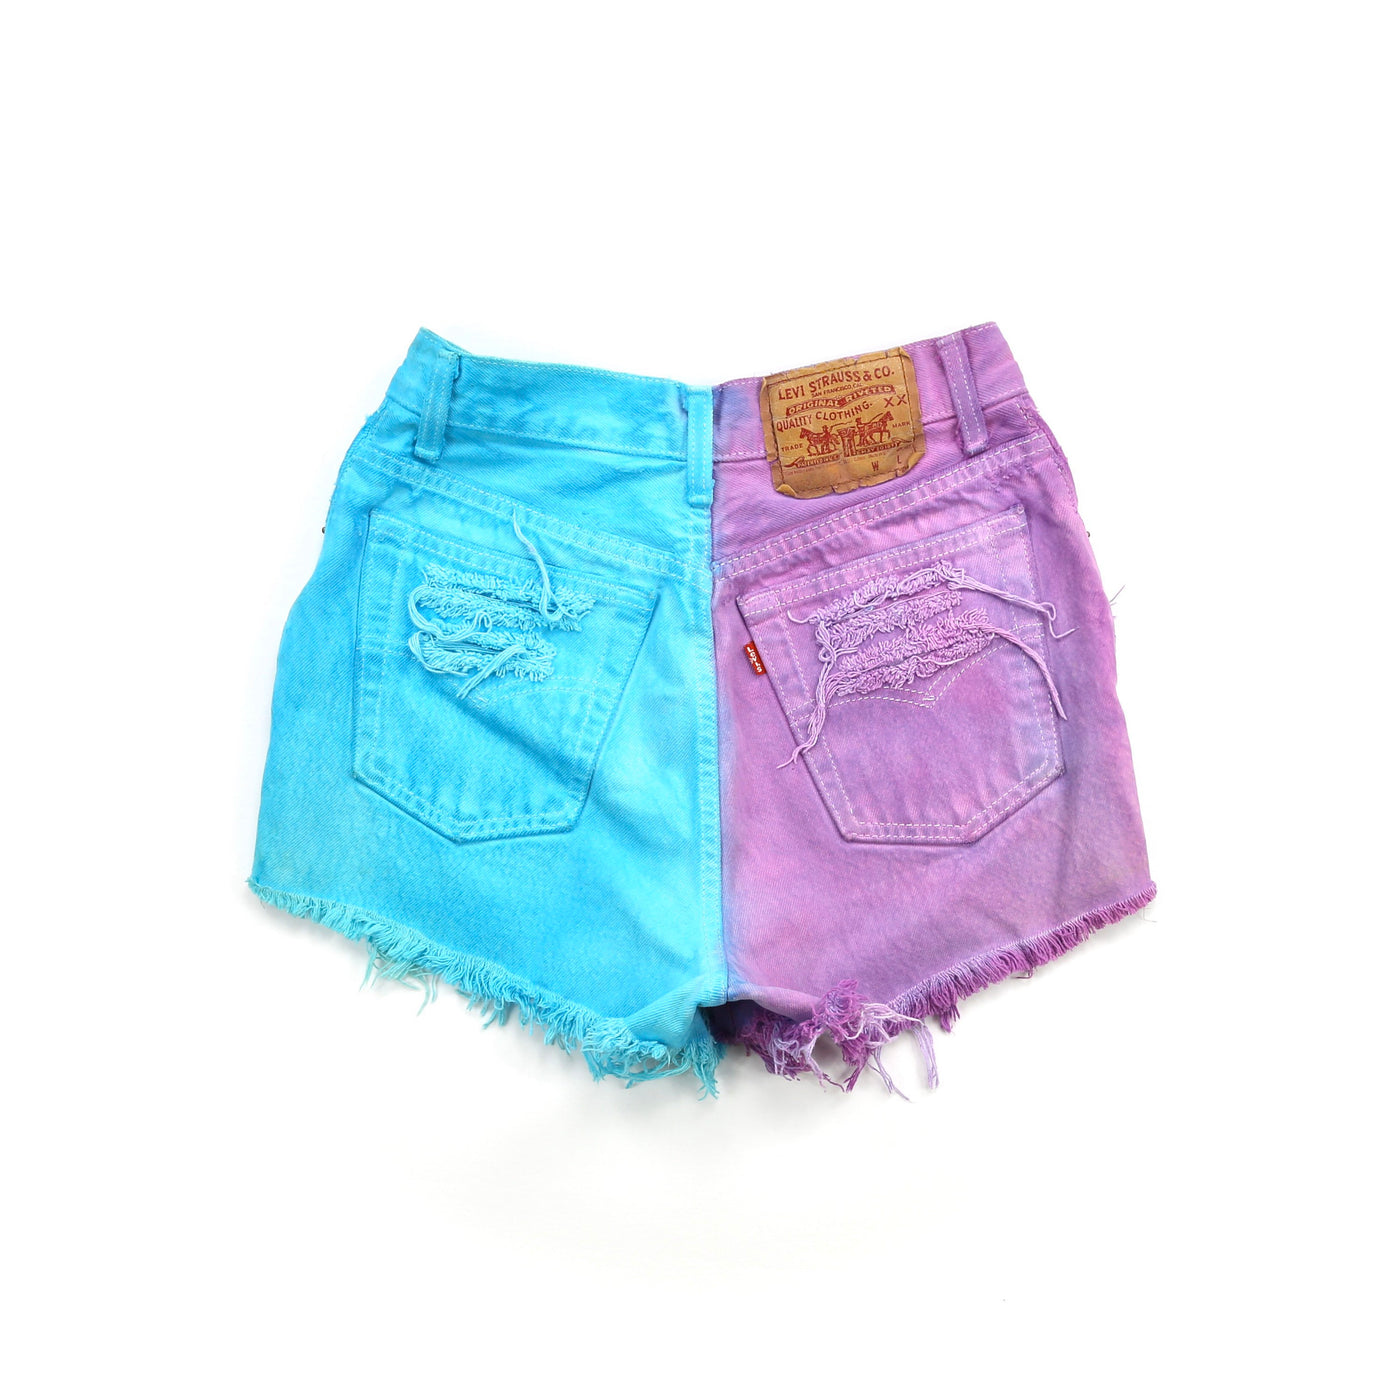 Vintage 501 Levis Half Dyed Purple Studded and Distressed High Waisted Shorts // Size 25 // Festival Outfits